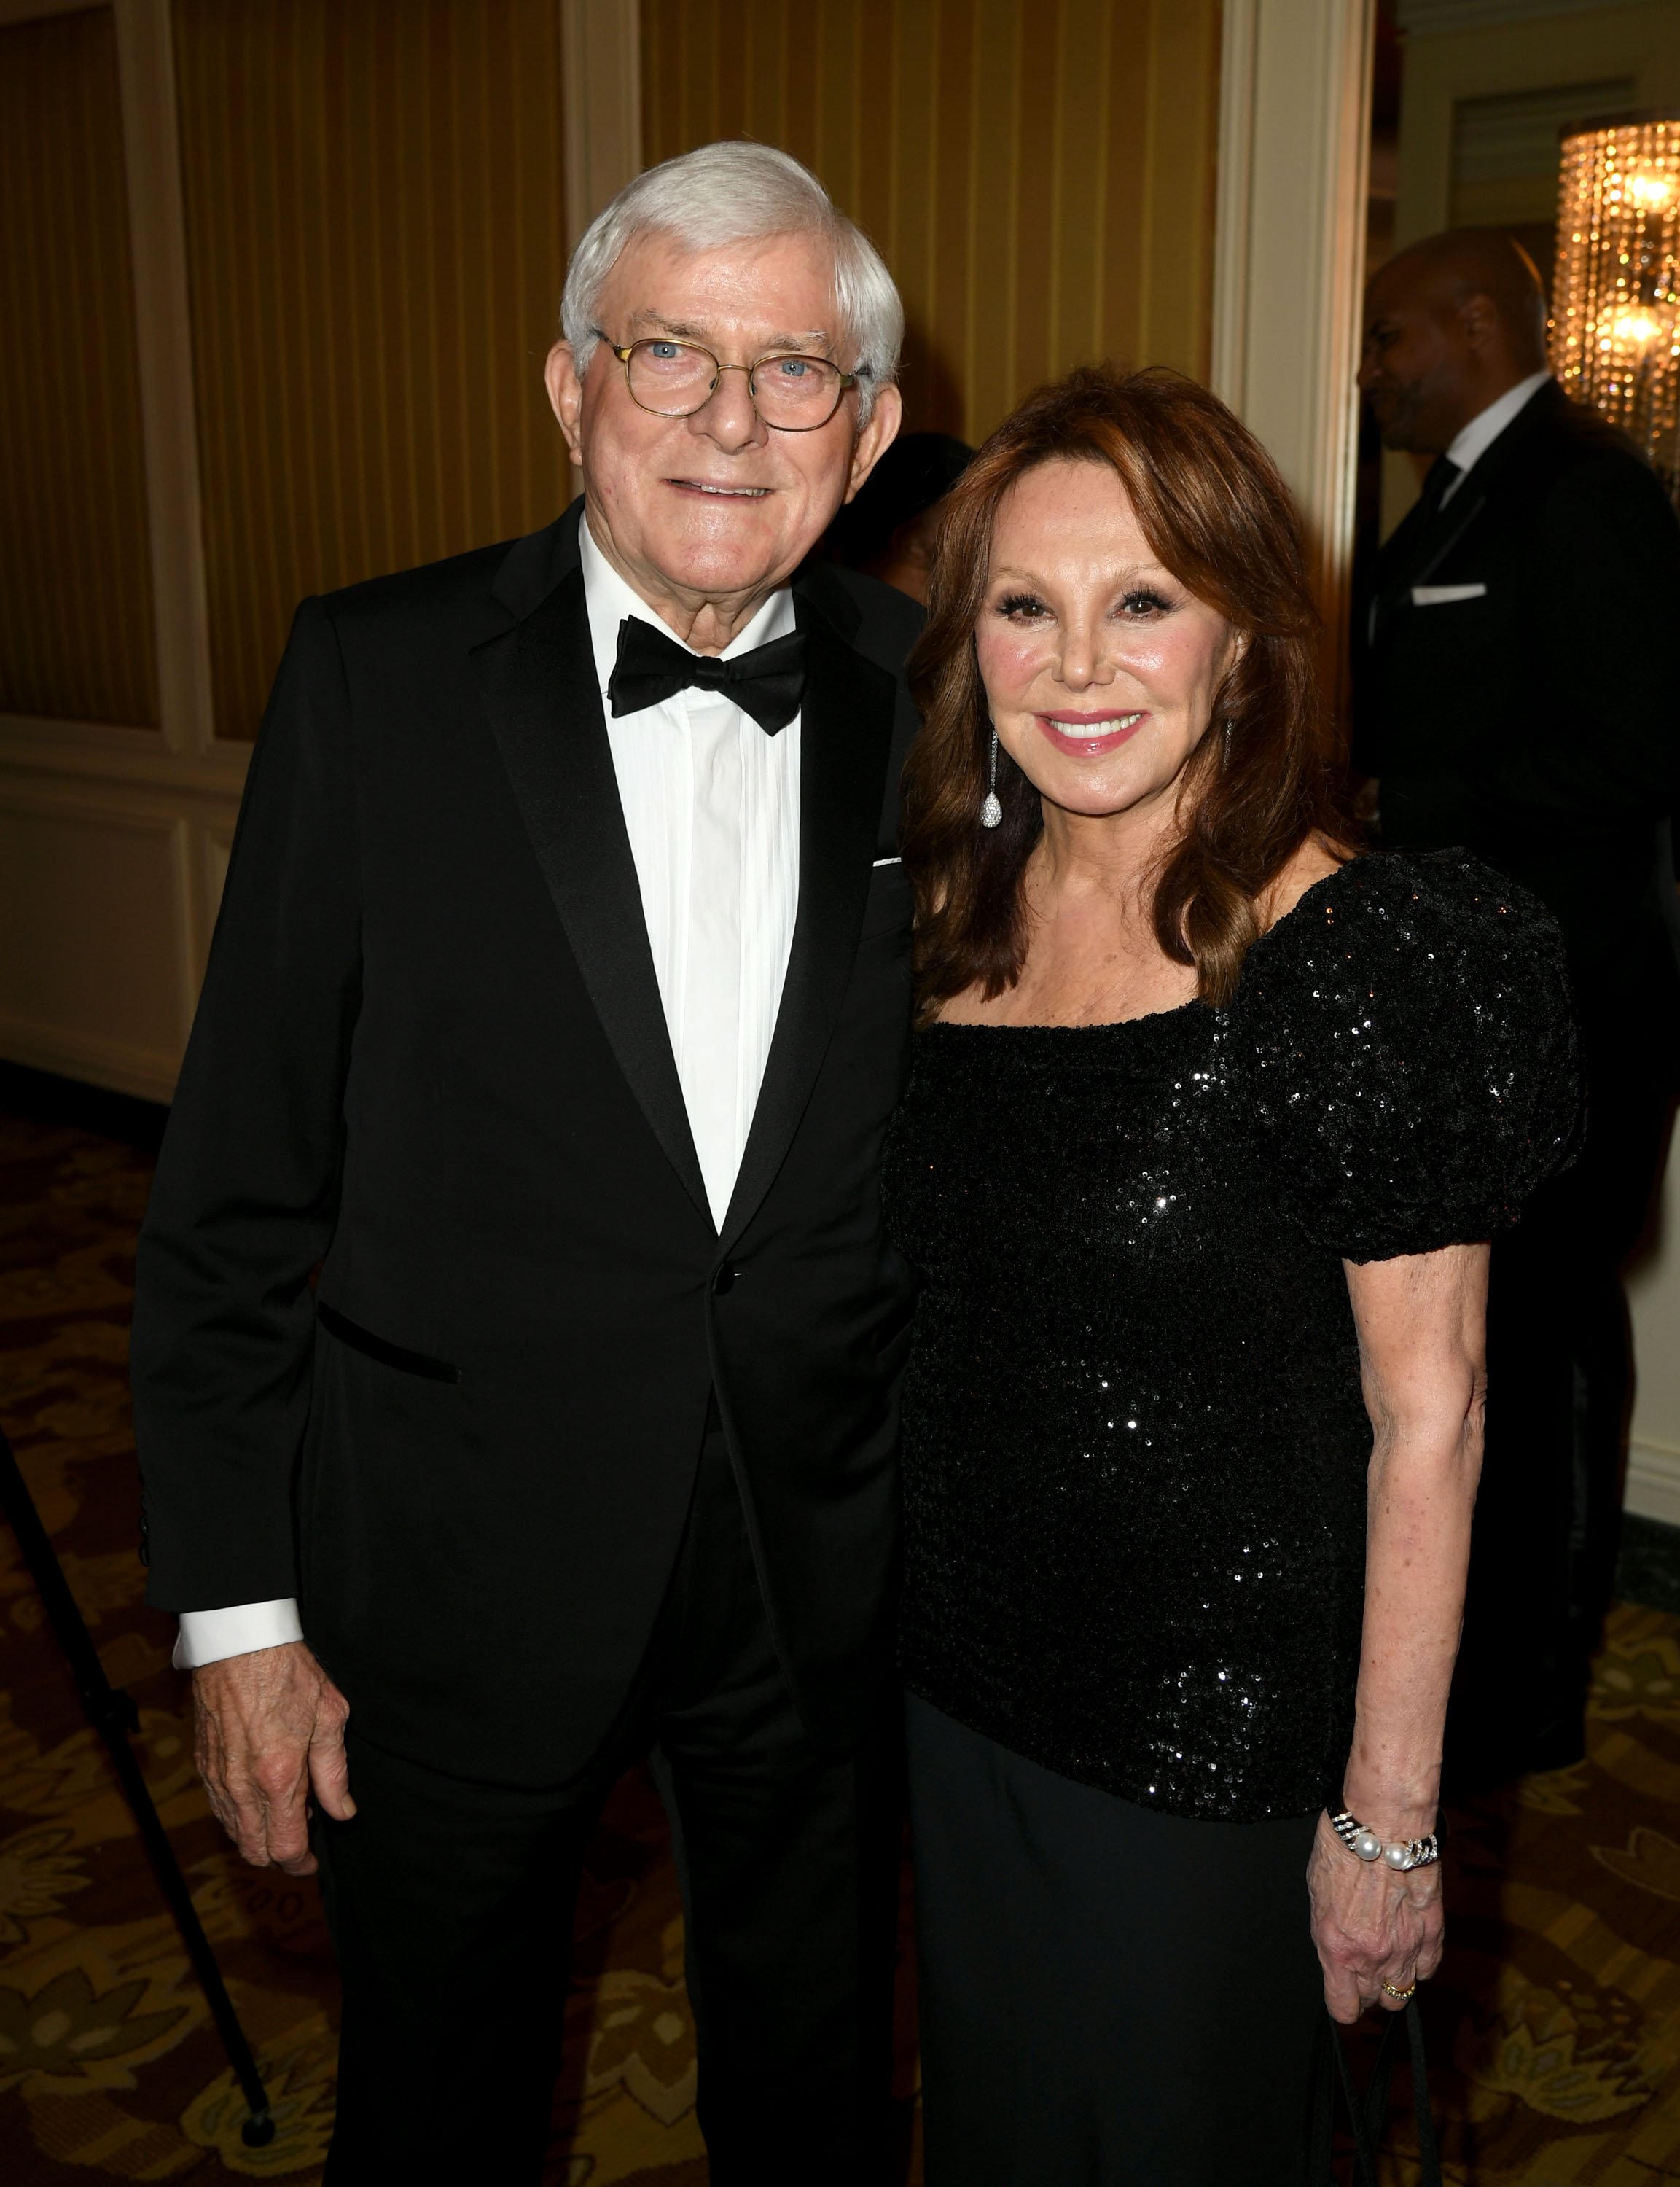 Phil Donahue and Marlos Thomas attend the American Icon Awards in Beverly Hills, California on May 19, 2019 | Photo: Getty Images